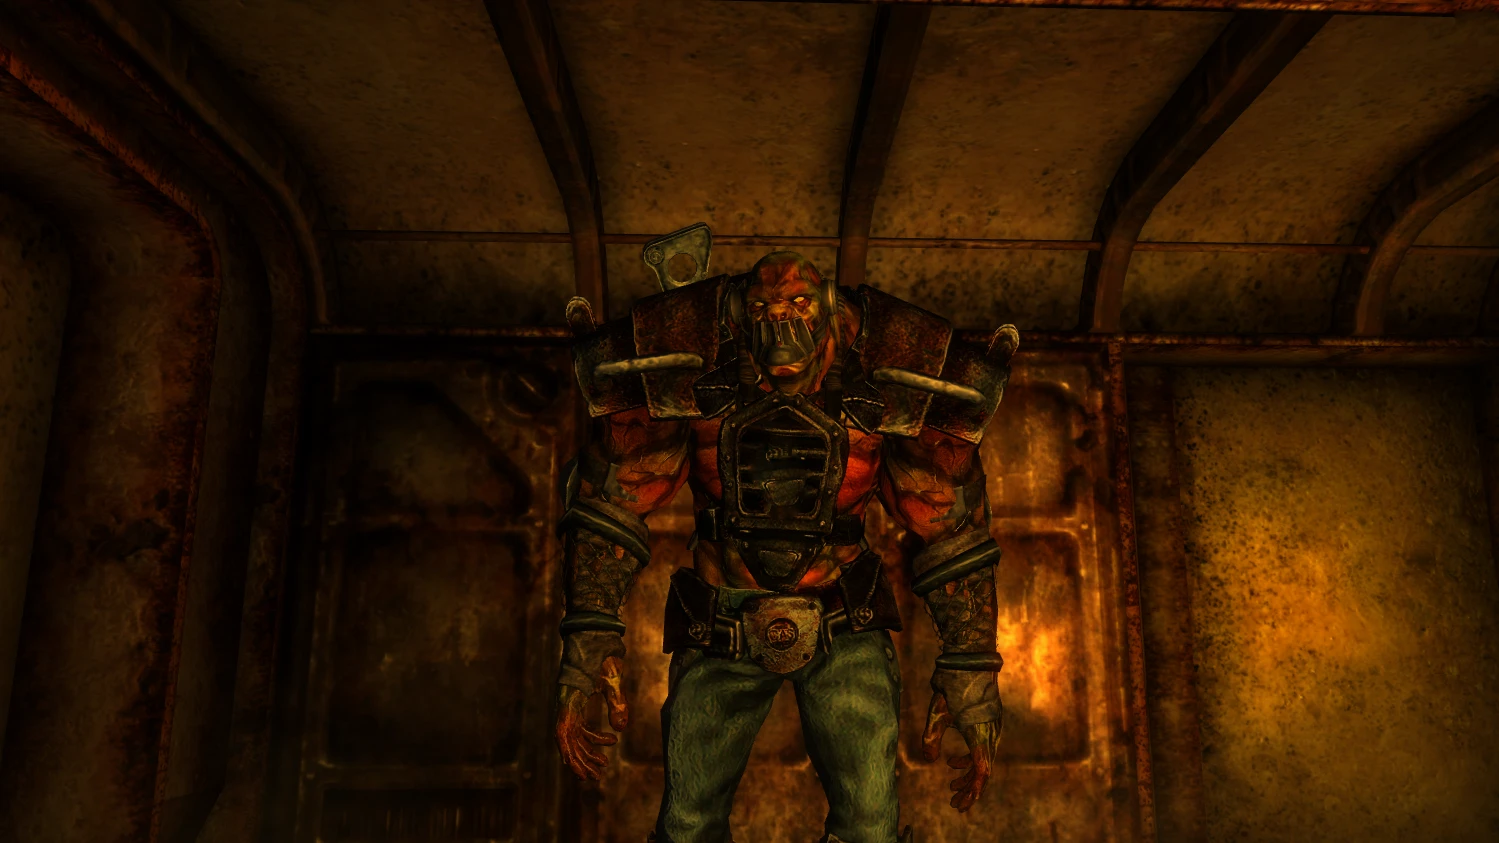 The Super Mutant known as Shephard